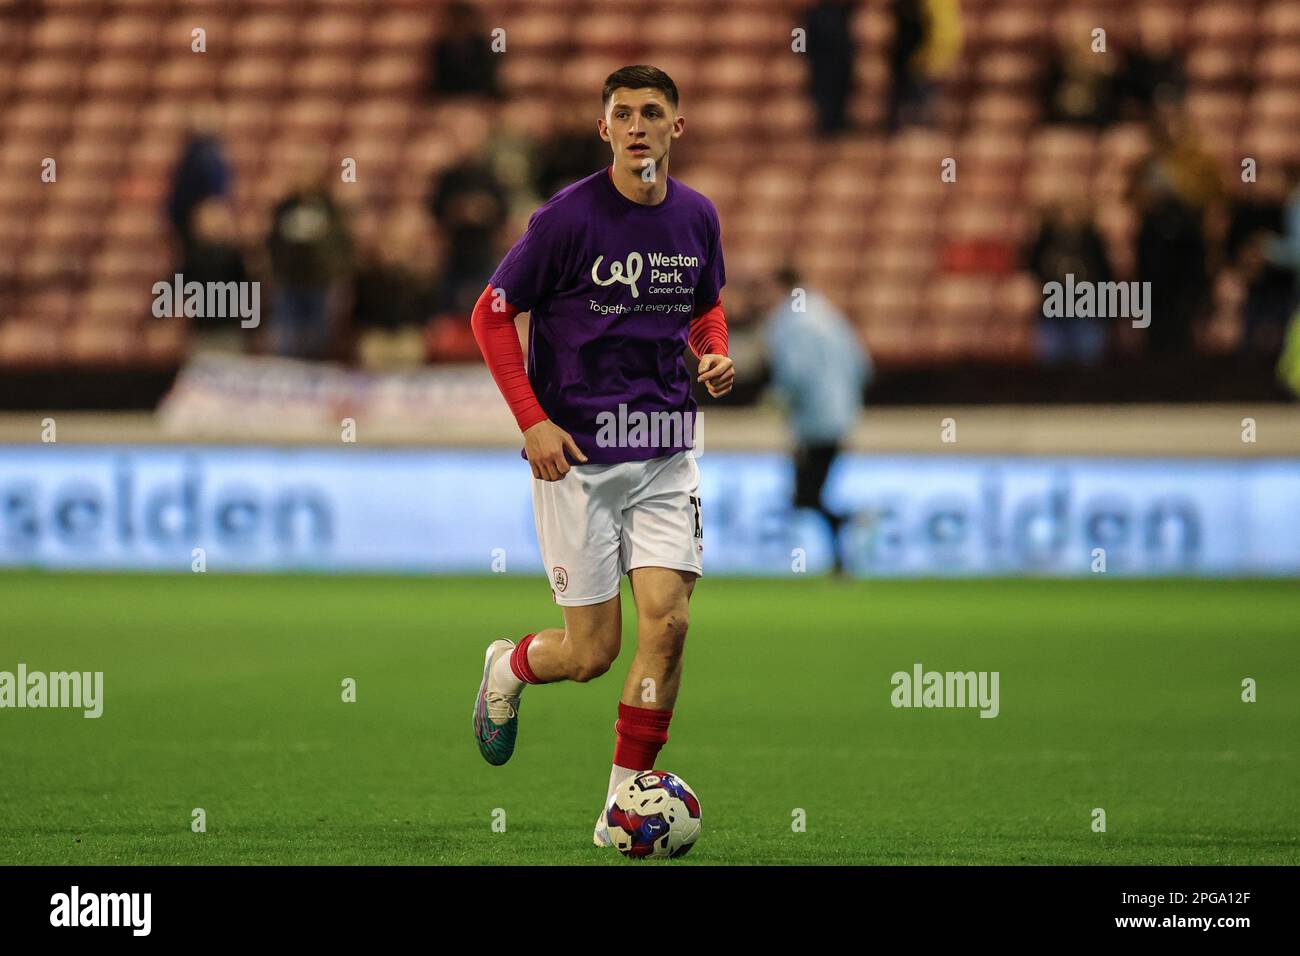 Bobby Thomas #12 of Barnsley in the pregame warmup session during the Sky Bet League 1 match Barnsley vs Sheffield Wednesday at Oakwell, Barnsley, United Kingdom, 21st March 2023  (Photo by Mark Cosgrove/News Images) Stock Photo